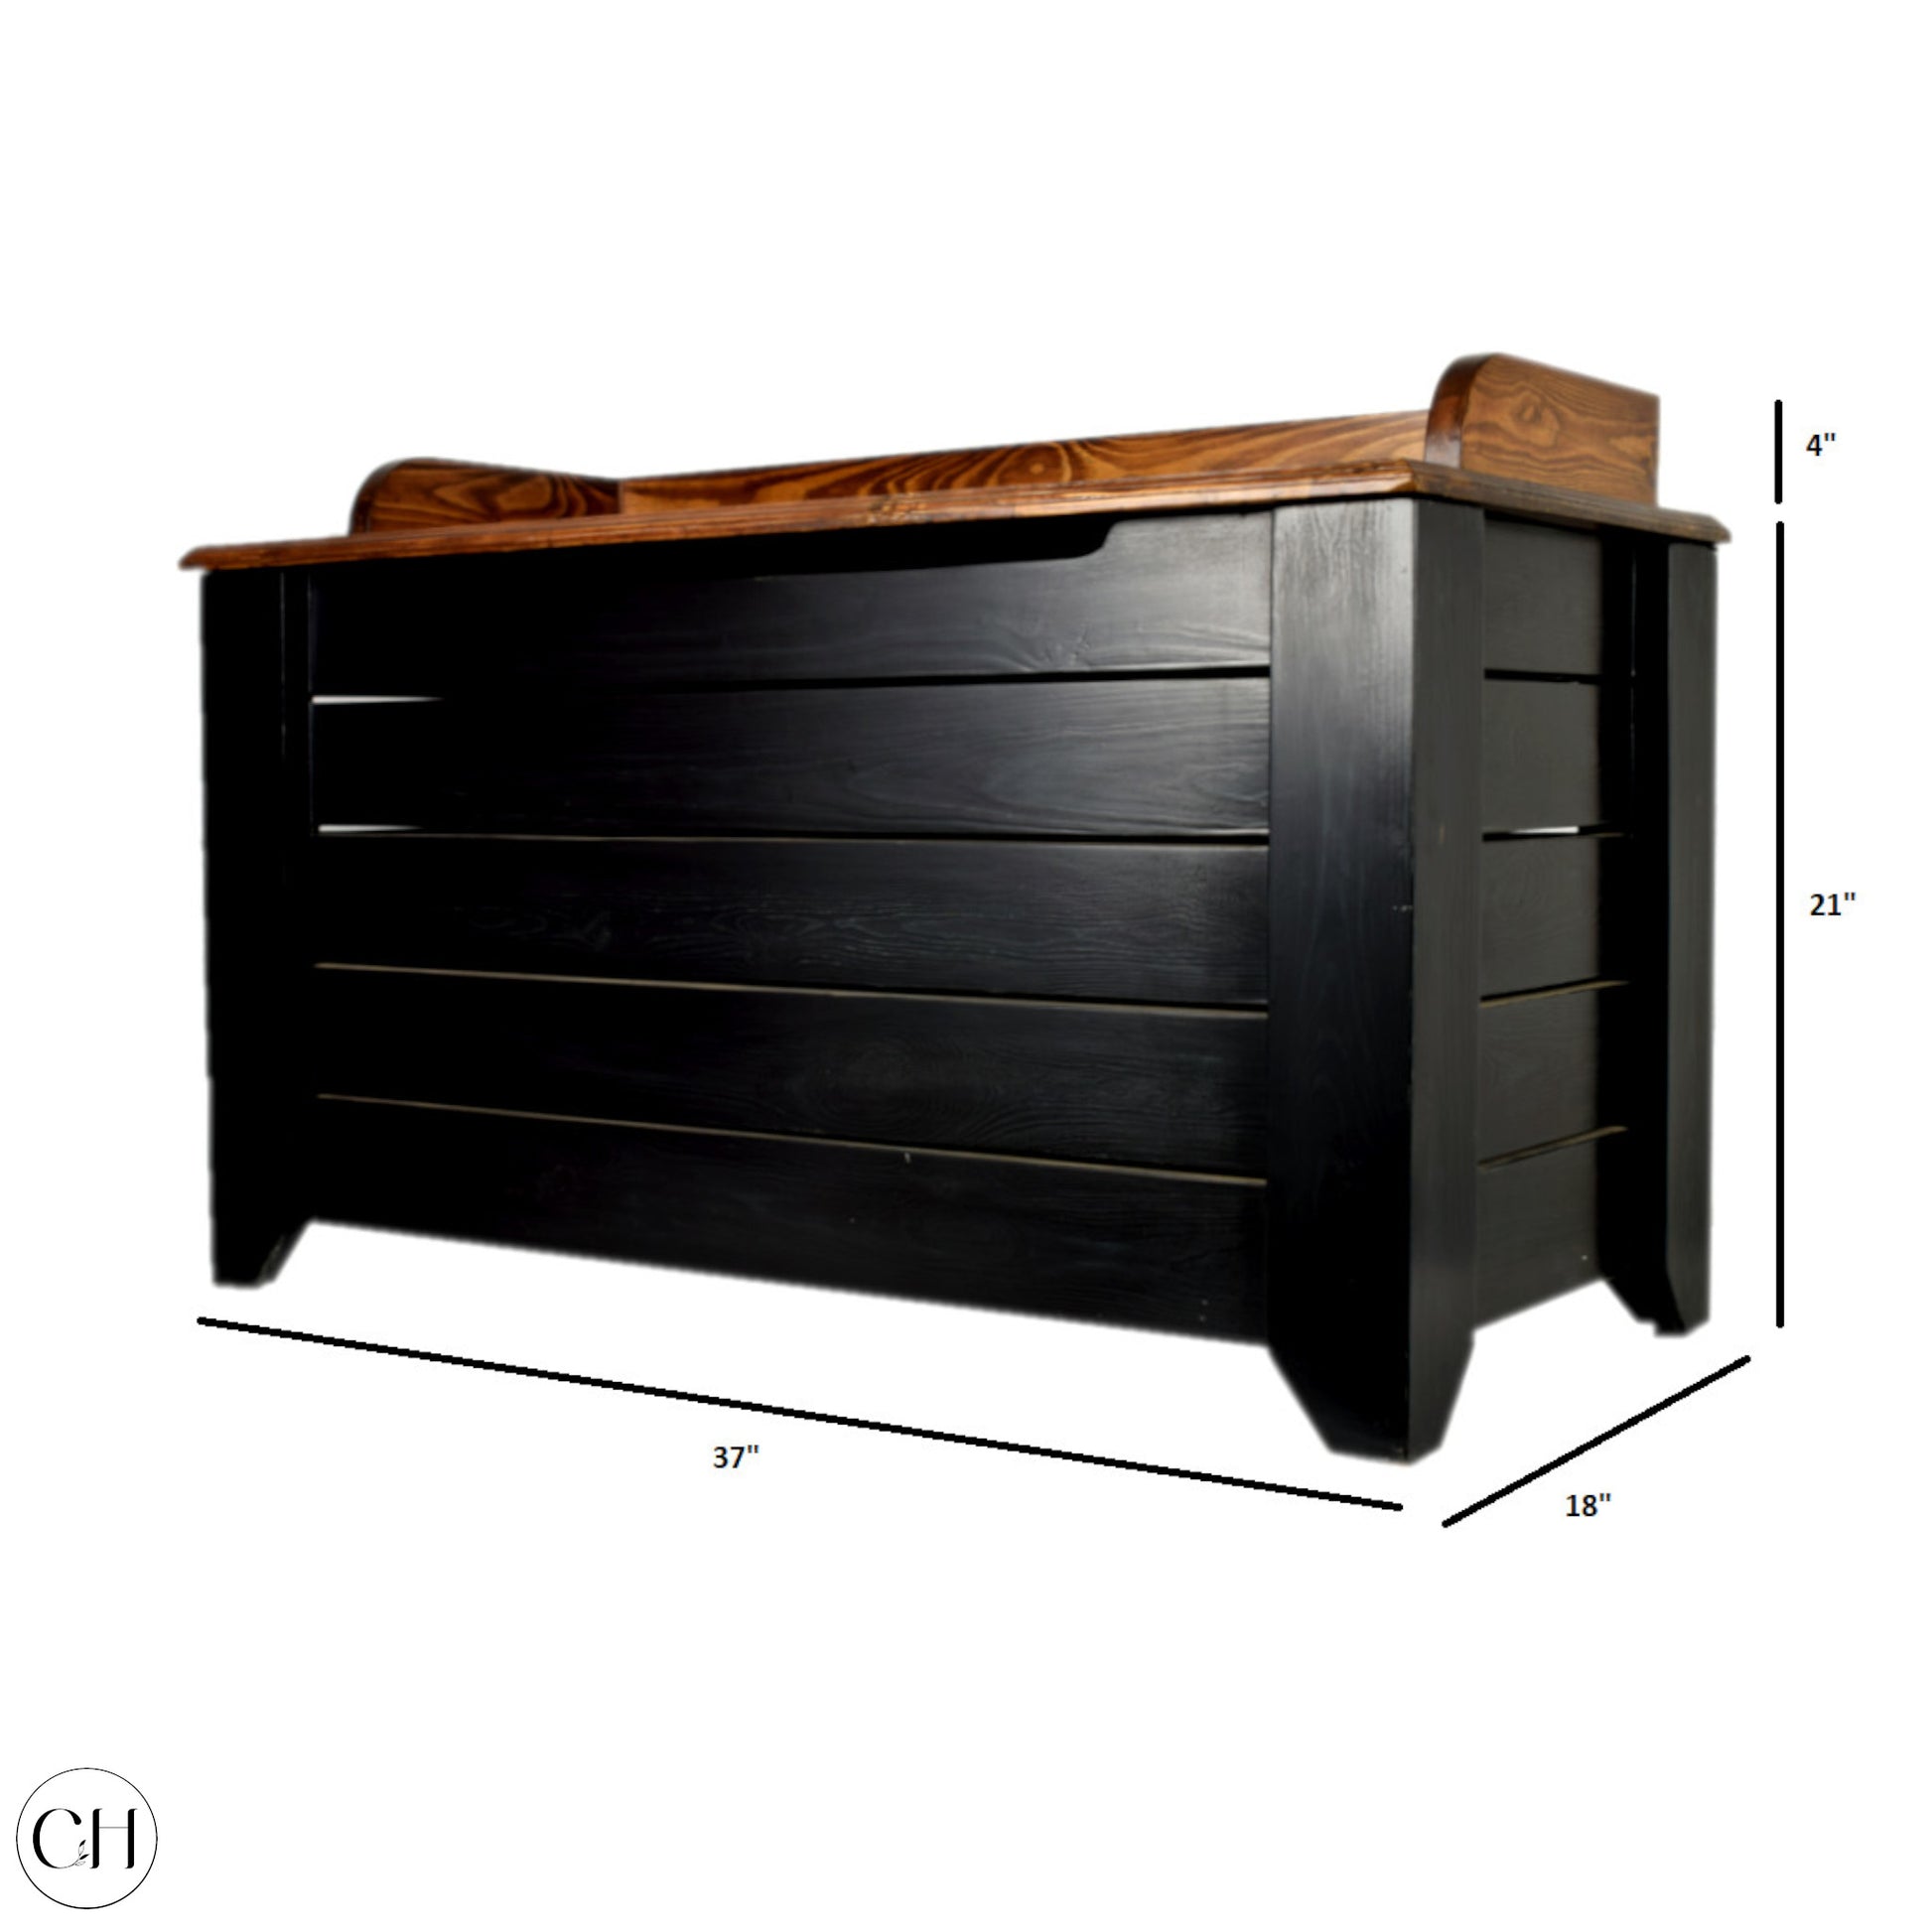 CustHum - Coucal - Large wooden storage box with thin backrest on the opening flap (dimensions)